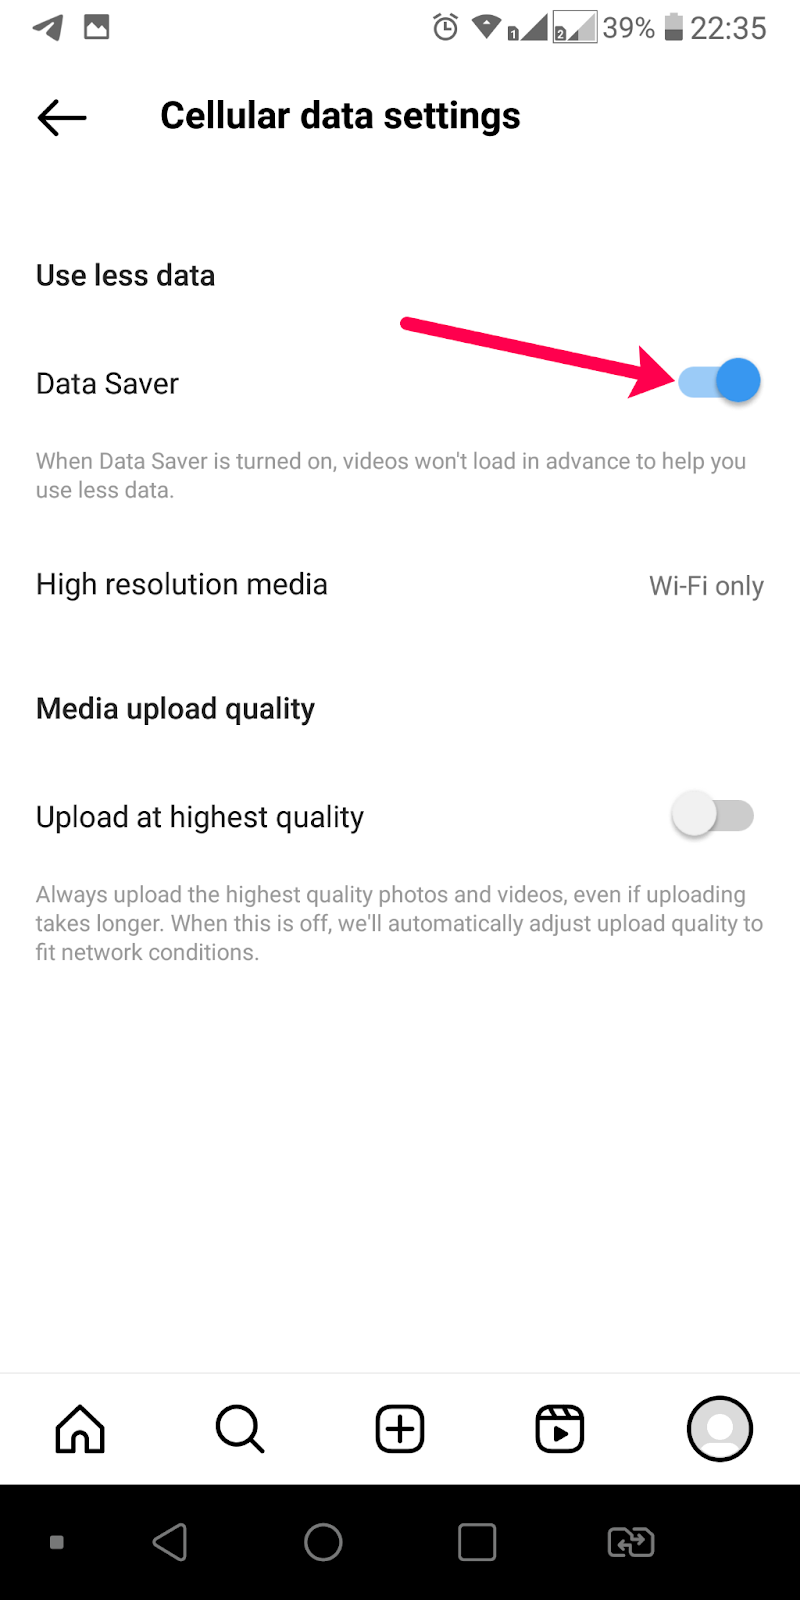 Cellular data settings to activate the Data Saver